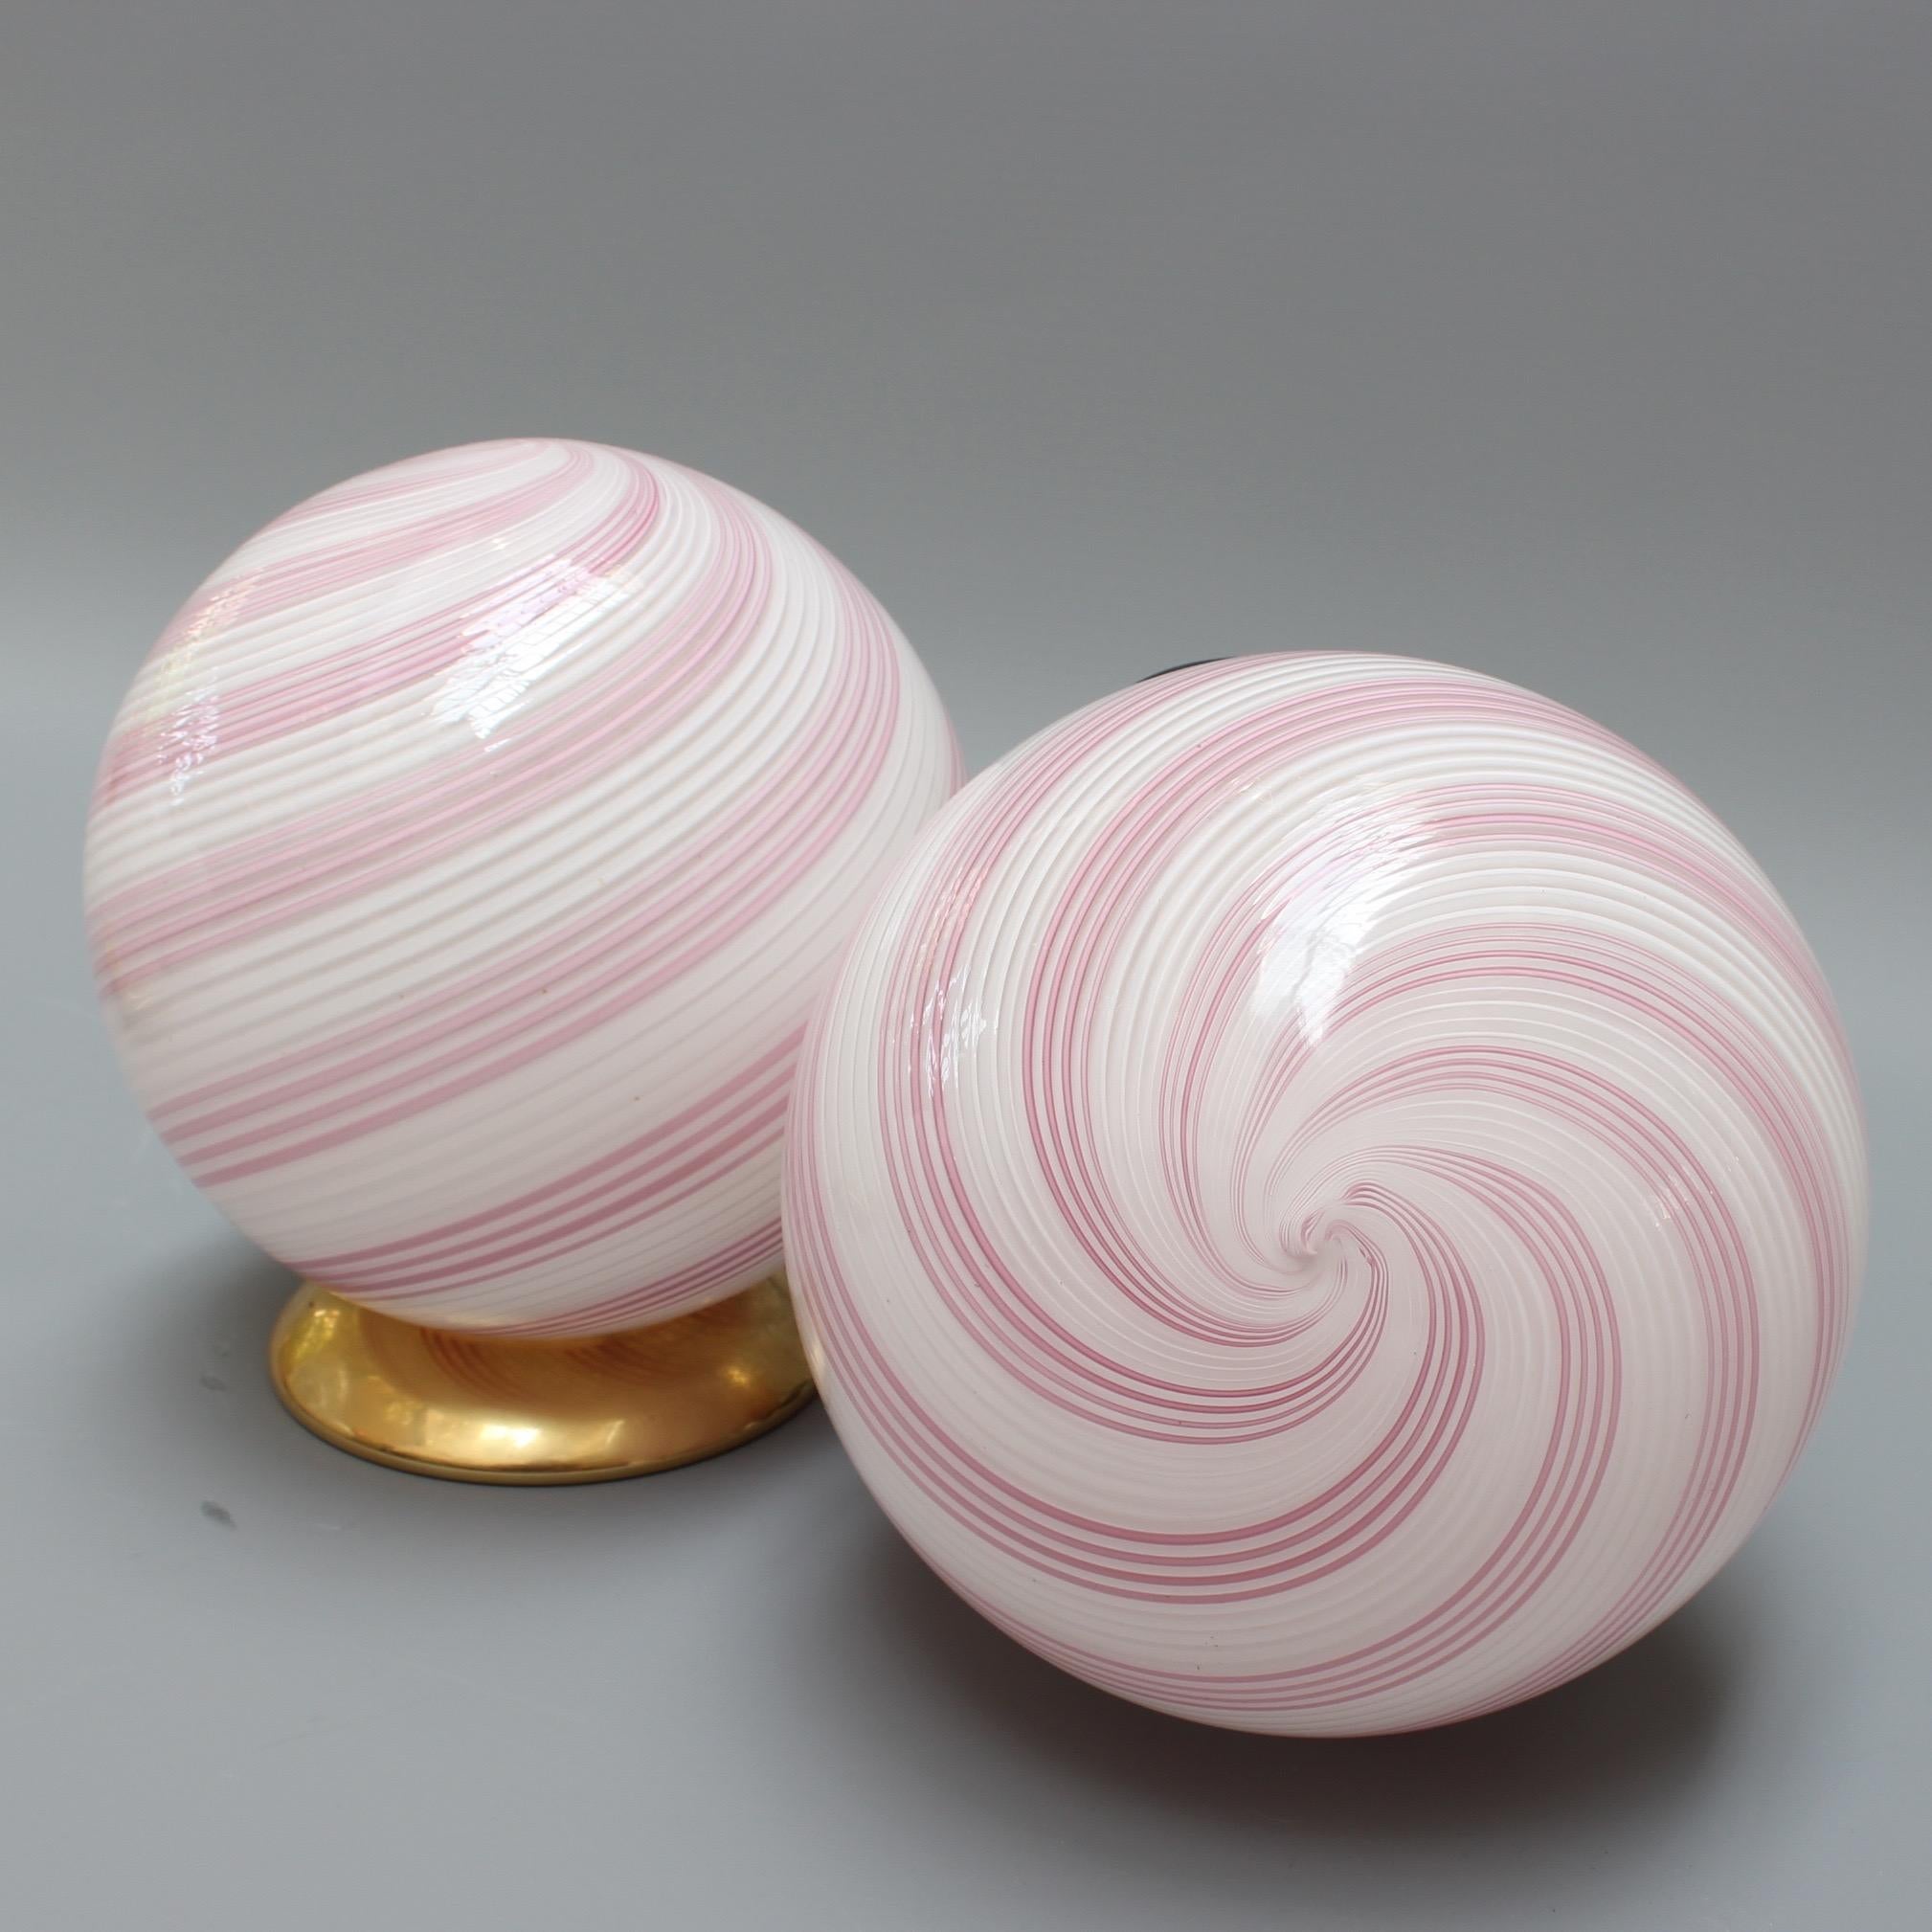 Pair of pink swirl Murano glass globe table lamps, circa 1960s. Elegant and stylish, these blown Murano glass globe lamps provide a source of lighting which is both functional and decorative. The pink swirls beautifully complement the brass-colored